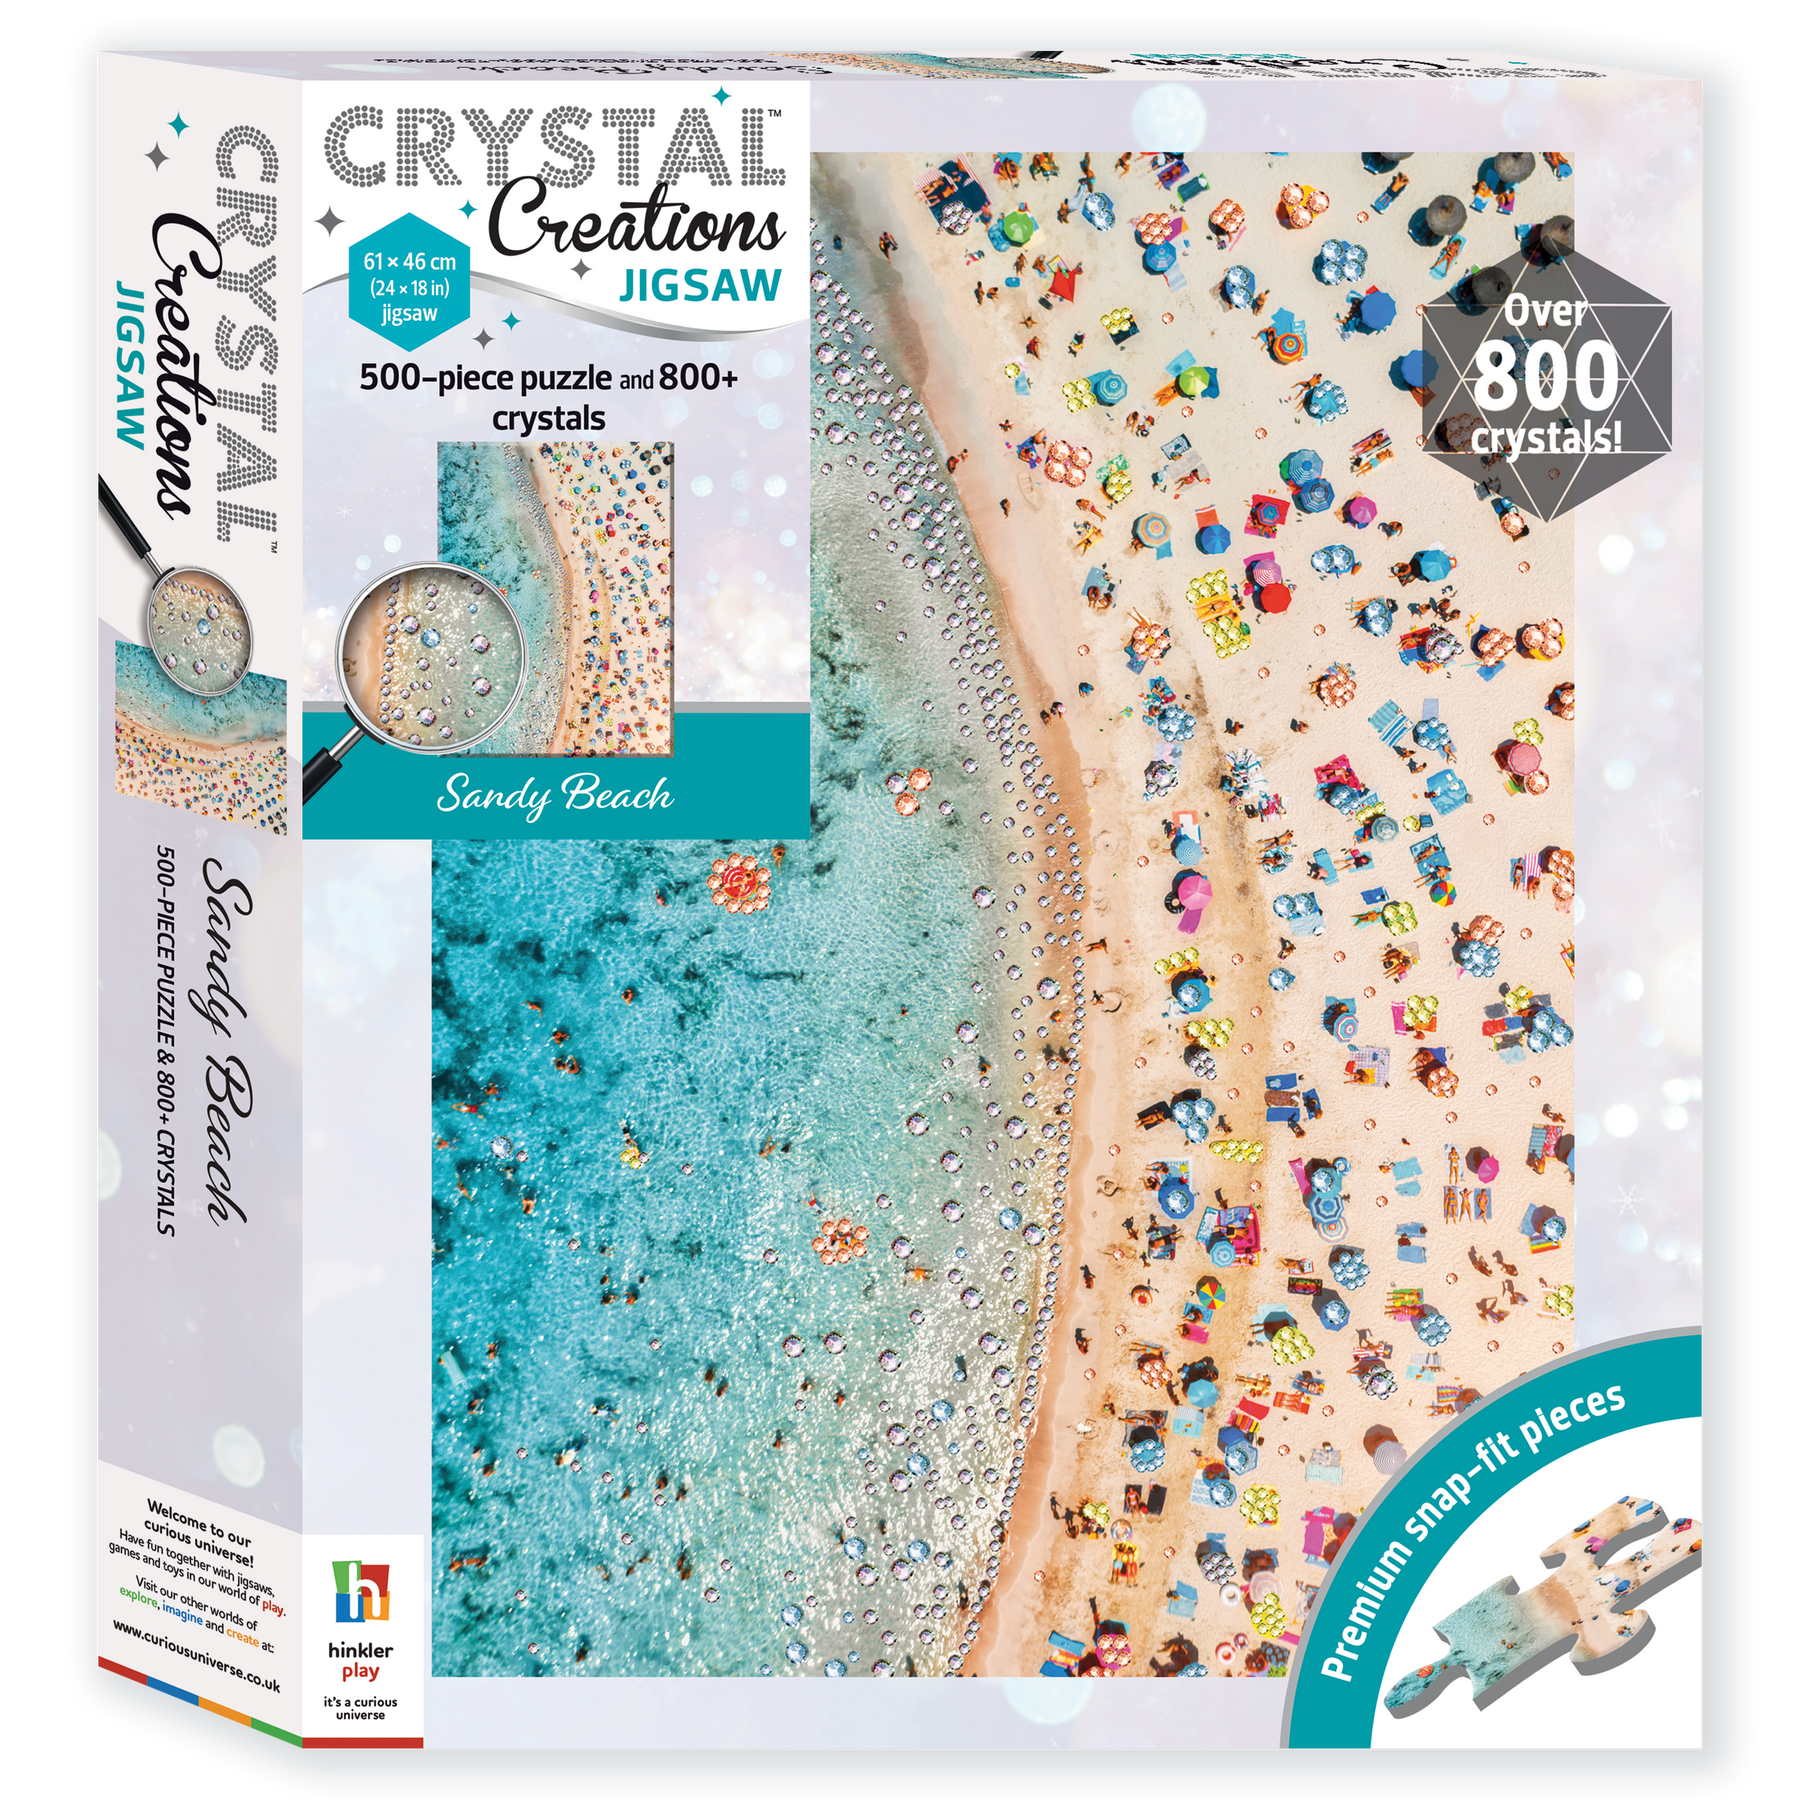 Sandy Beach X500Pcs Jigsaw Puzzle And Over 800Crystals